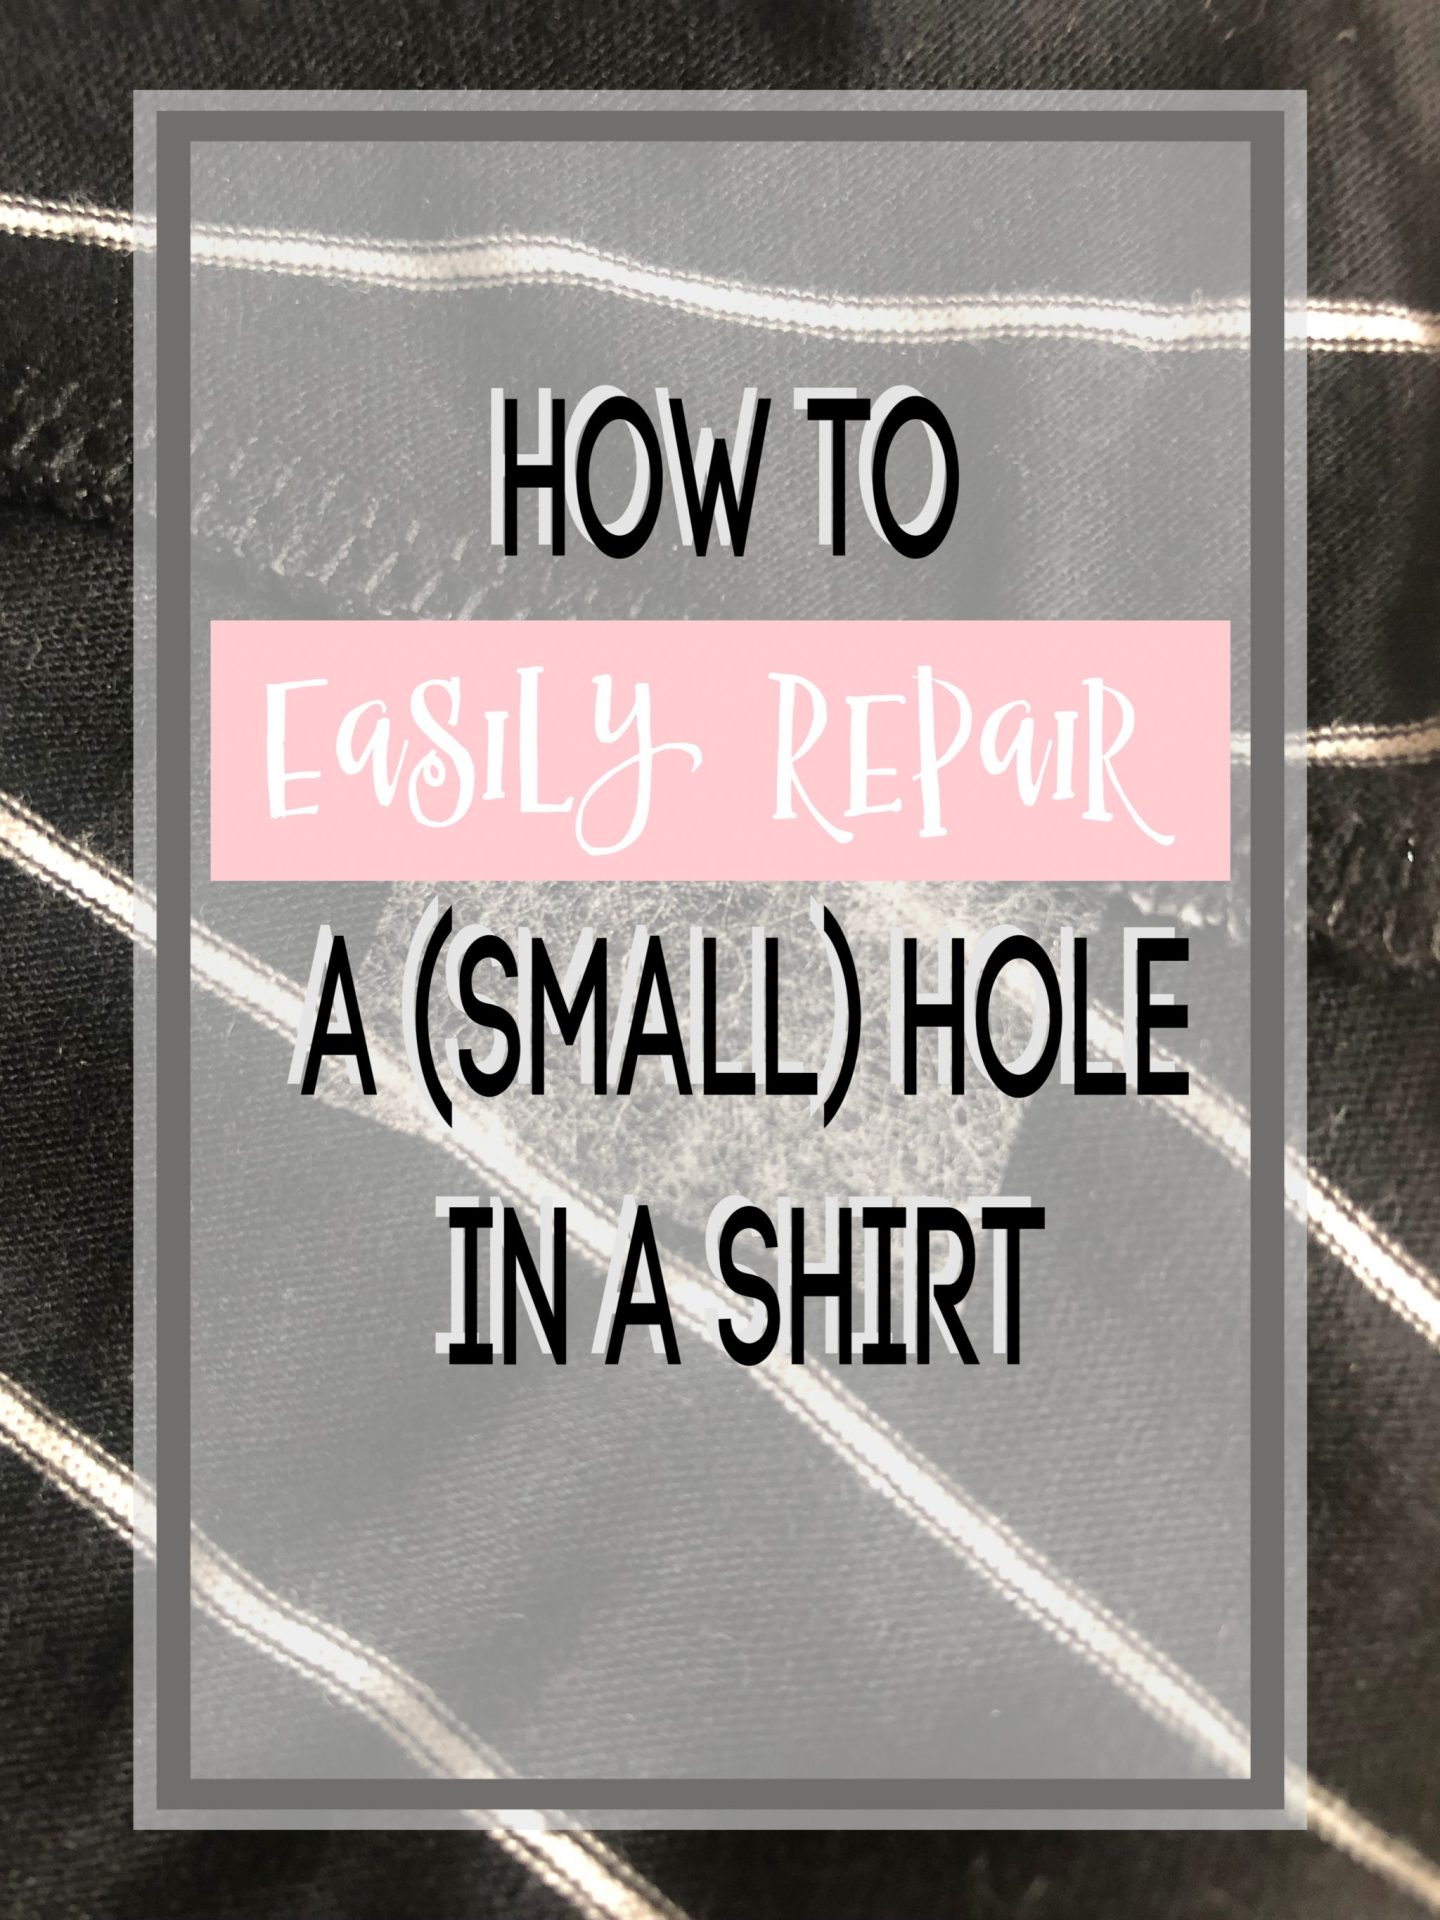 How to easily repair a small hole in a shirt